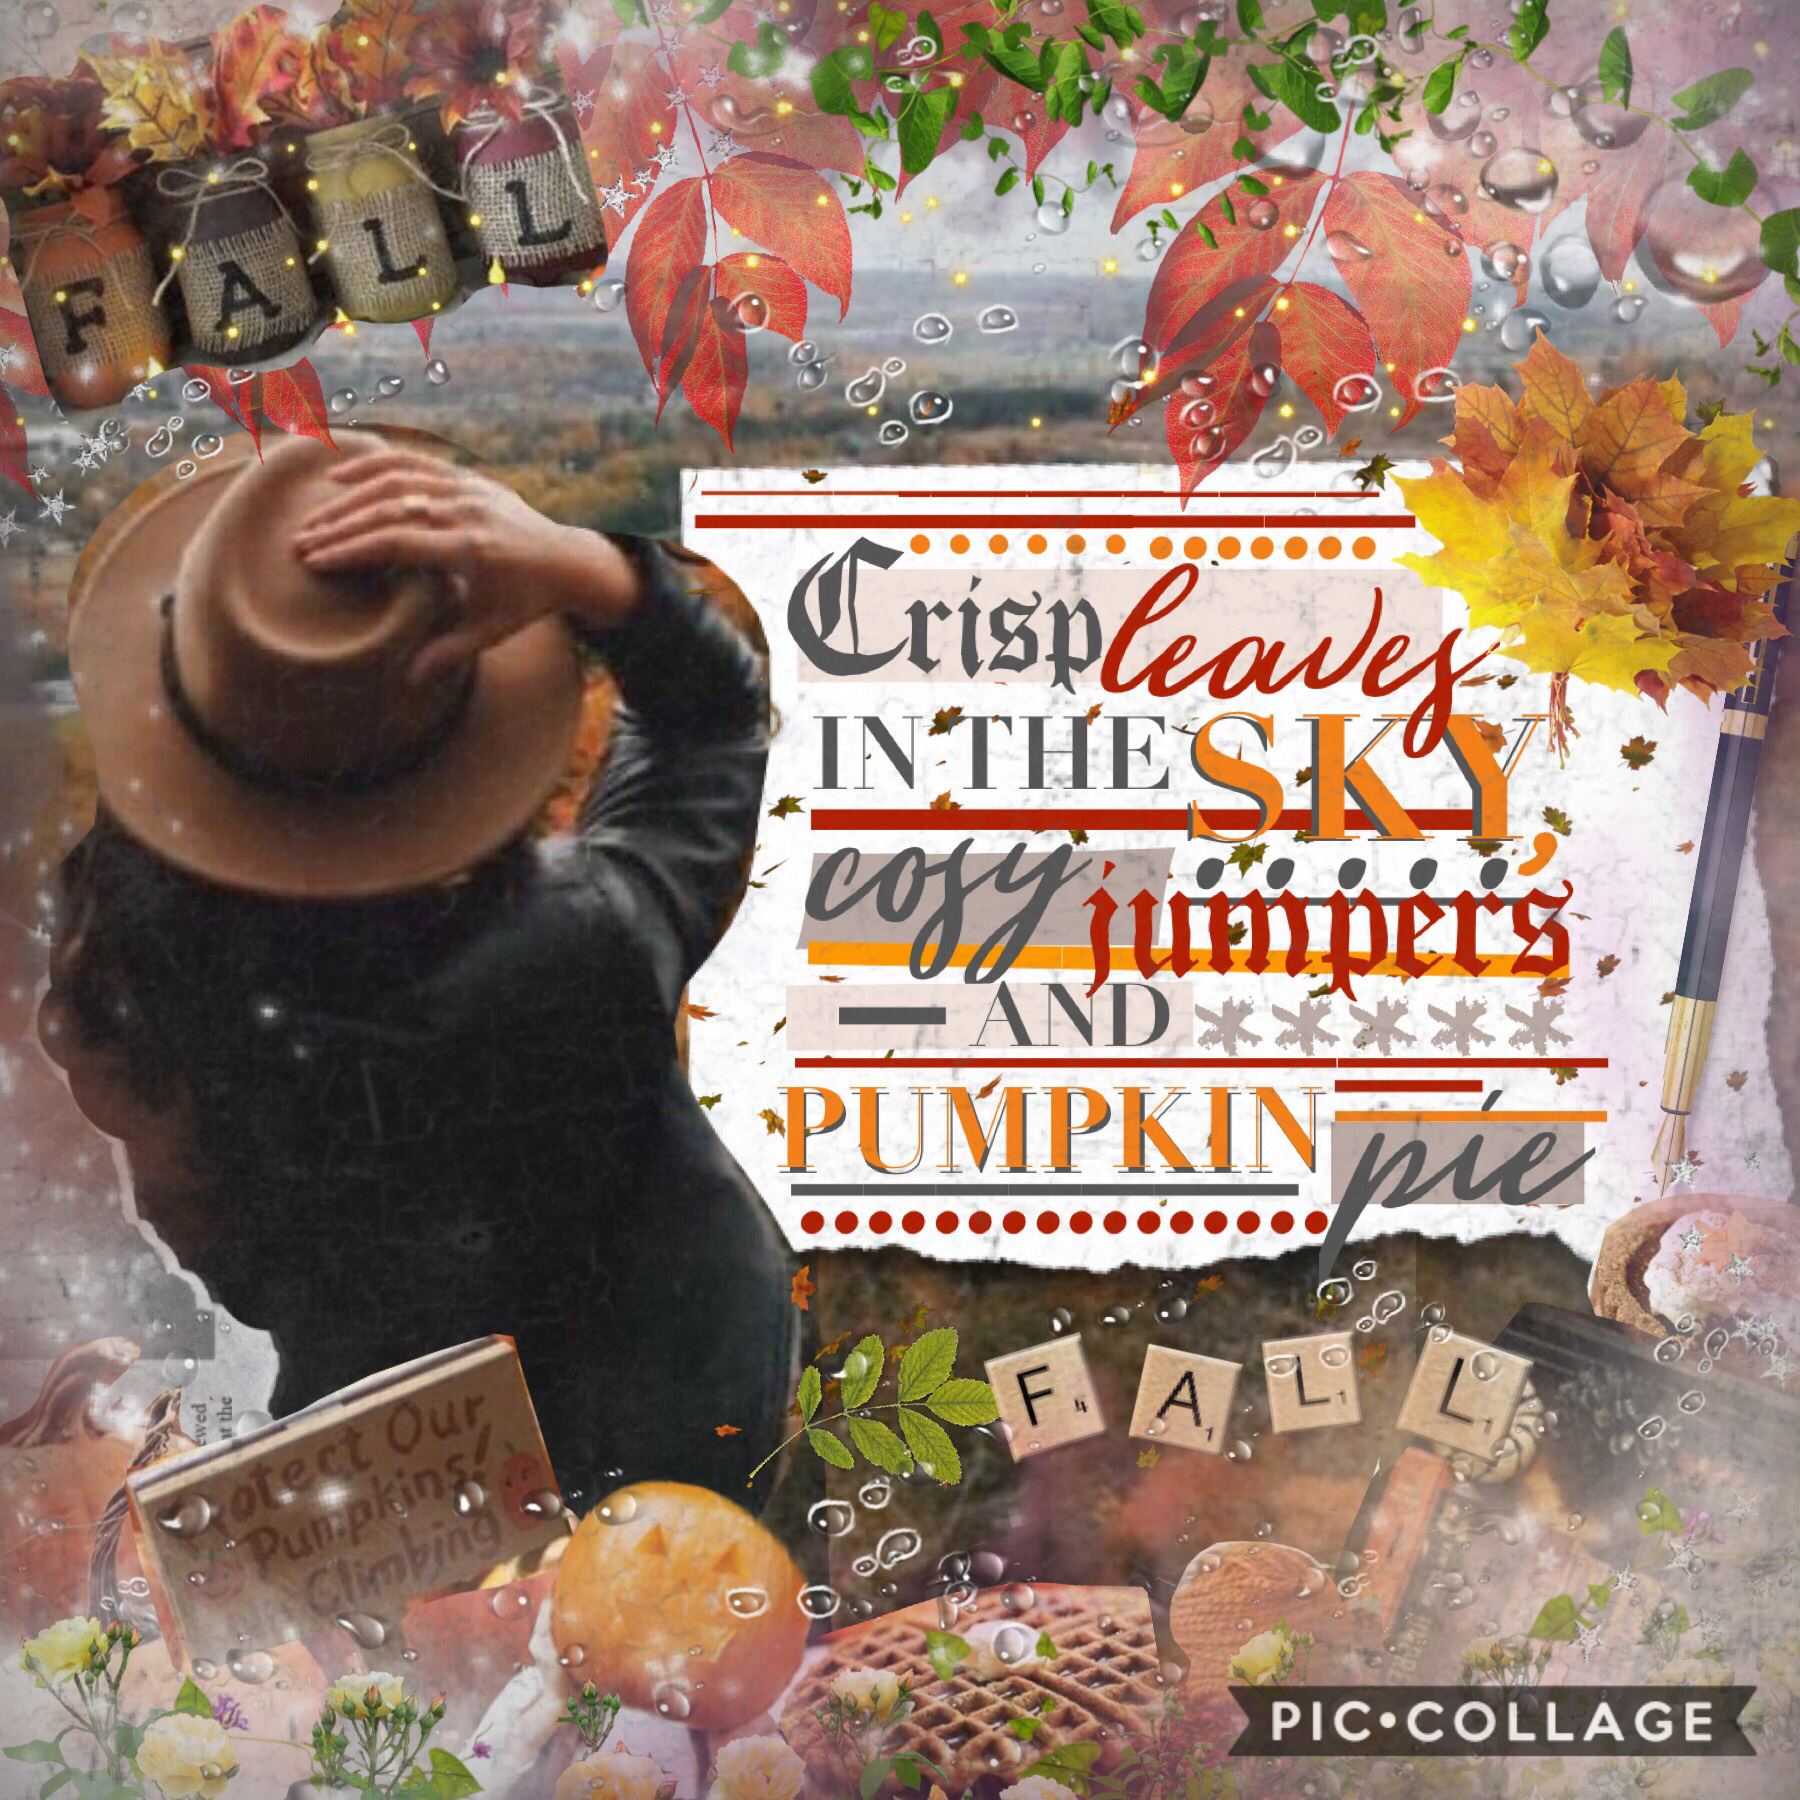 It's autumn!!🍁Autumn is just such an amazing season. I love being able to wear cozy jumpers and drink hot chocolate again 😂☺️🍁Entry for trackandfieldlife's contest. ✨Sorry for the inactivity school has been such a whirlwind this half term. Glad to be off 